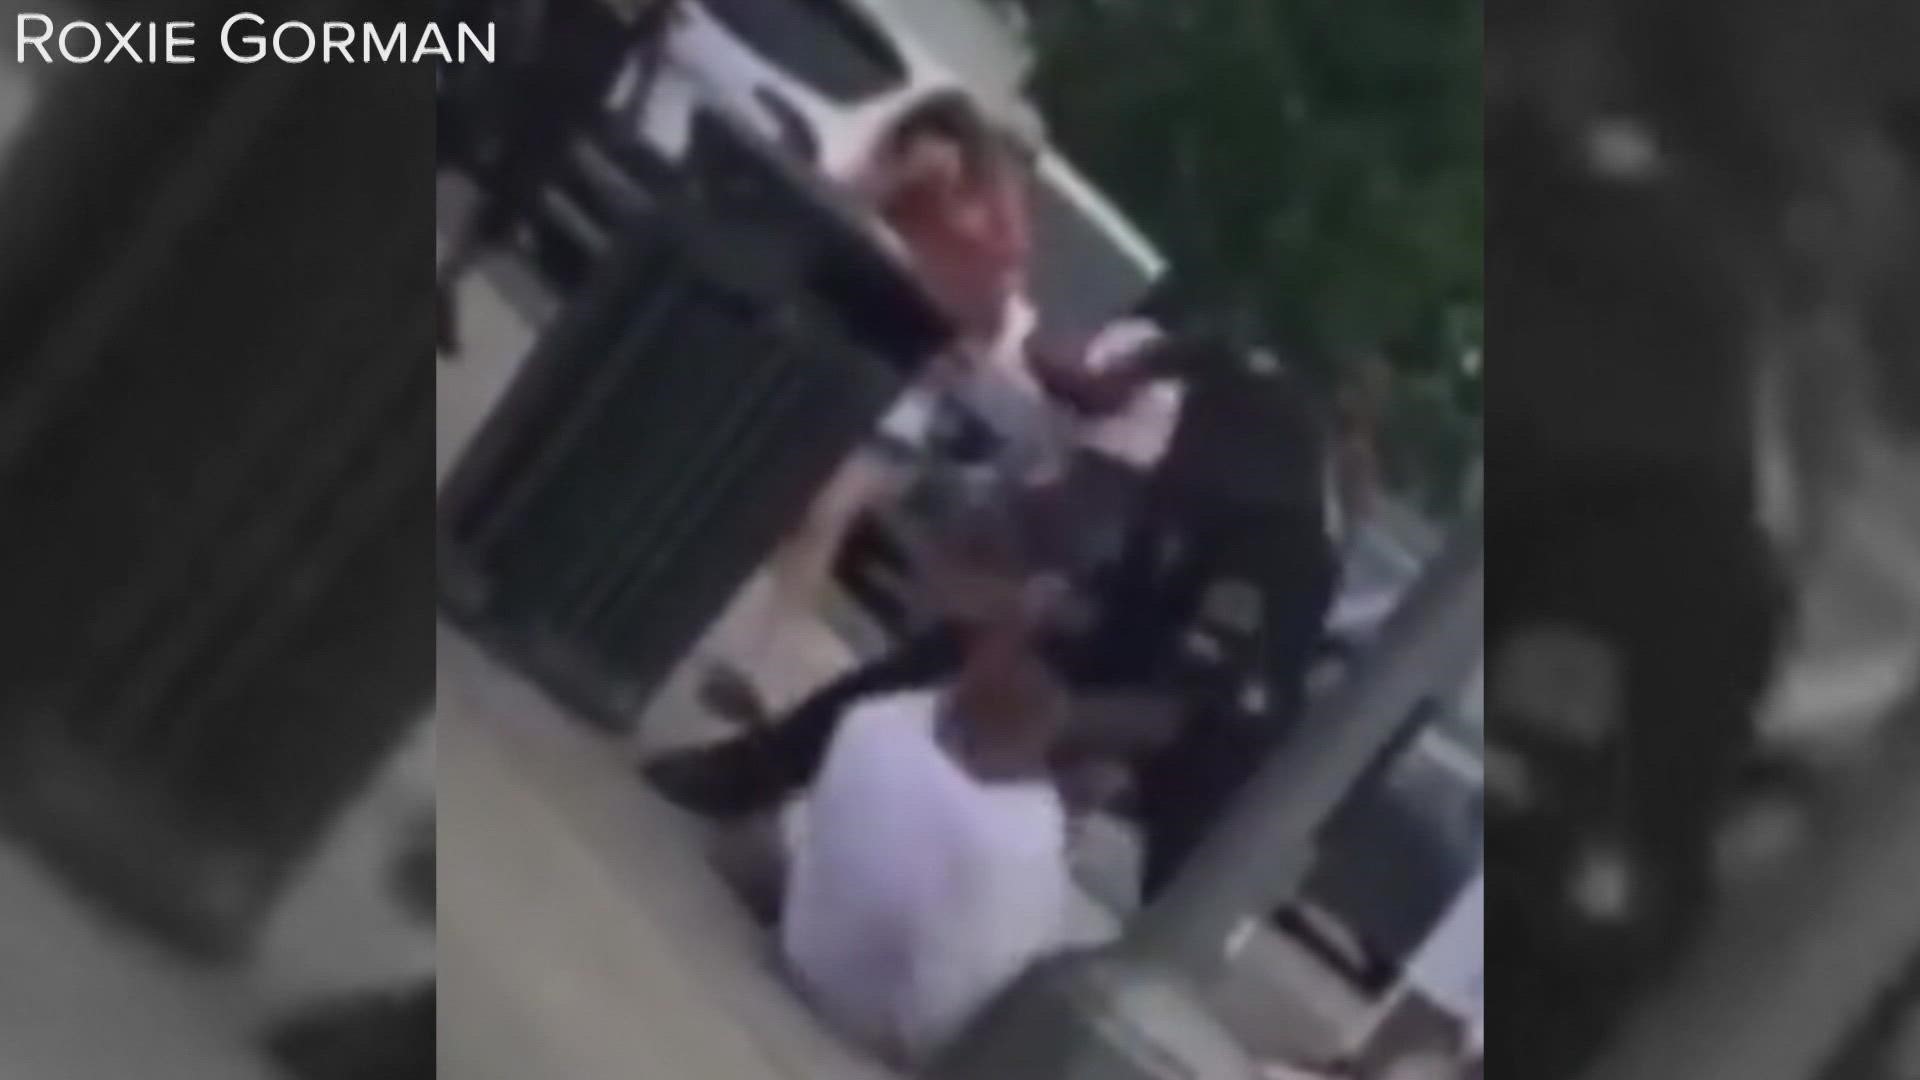 A Dallas police office seen punching a man in Deep Ellum in a viral video has been fired from the department according to police.